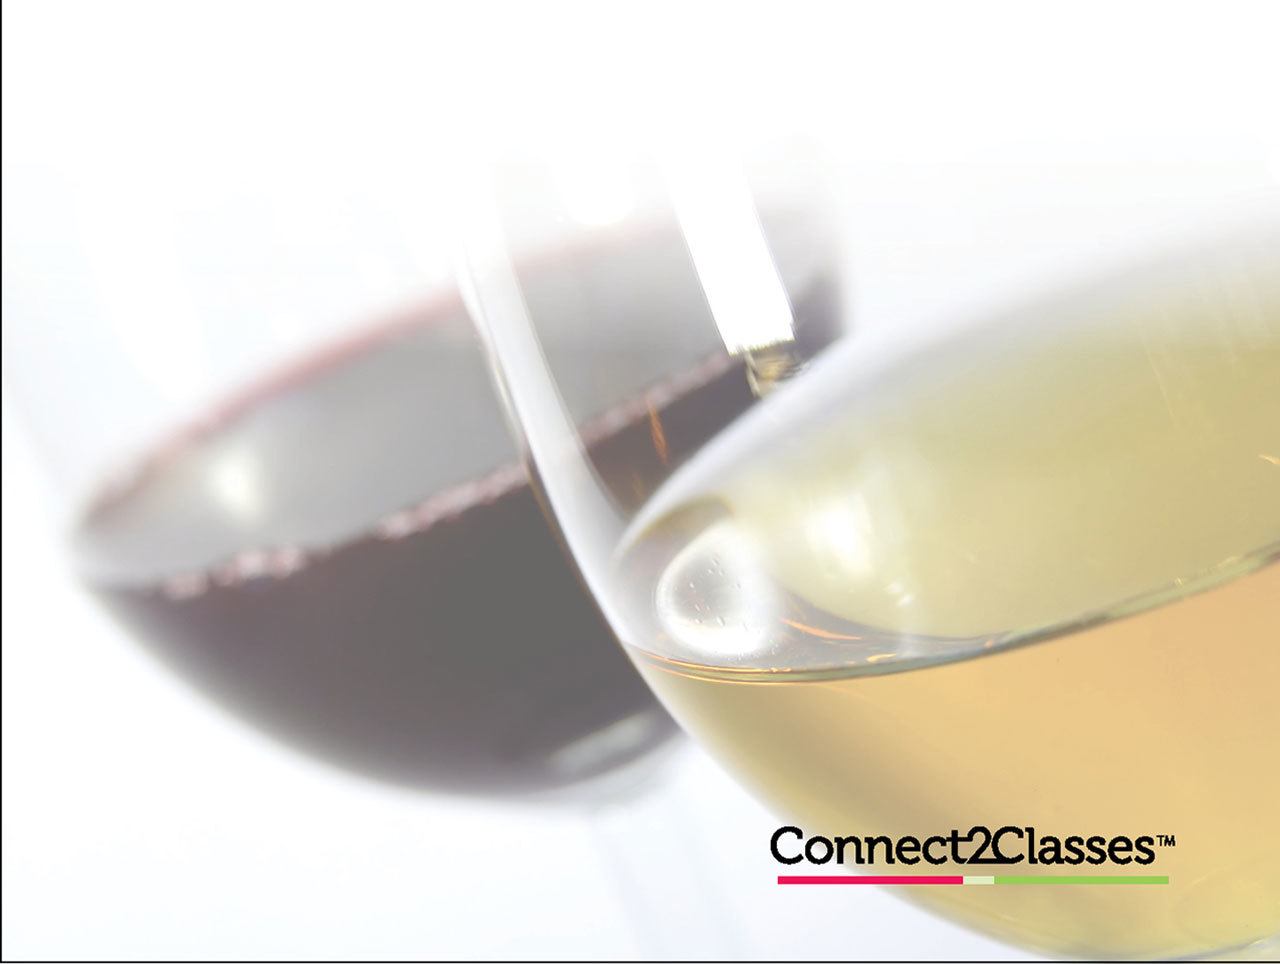 Start 2017 off building your wine skills in a variety of classes offered at Seattle Wine School.